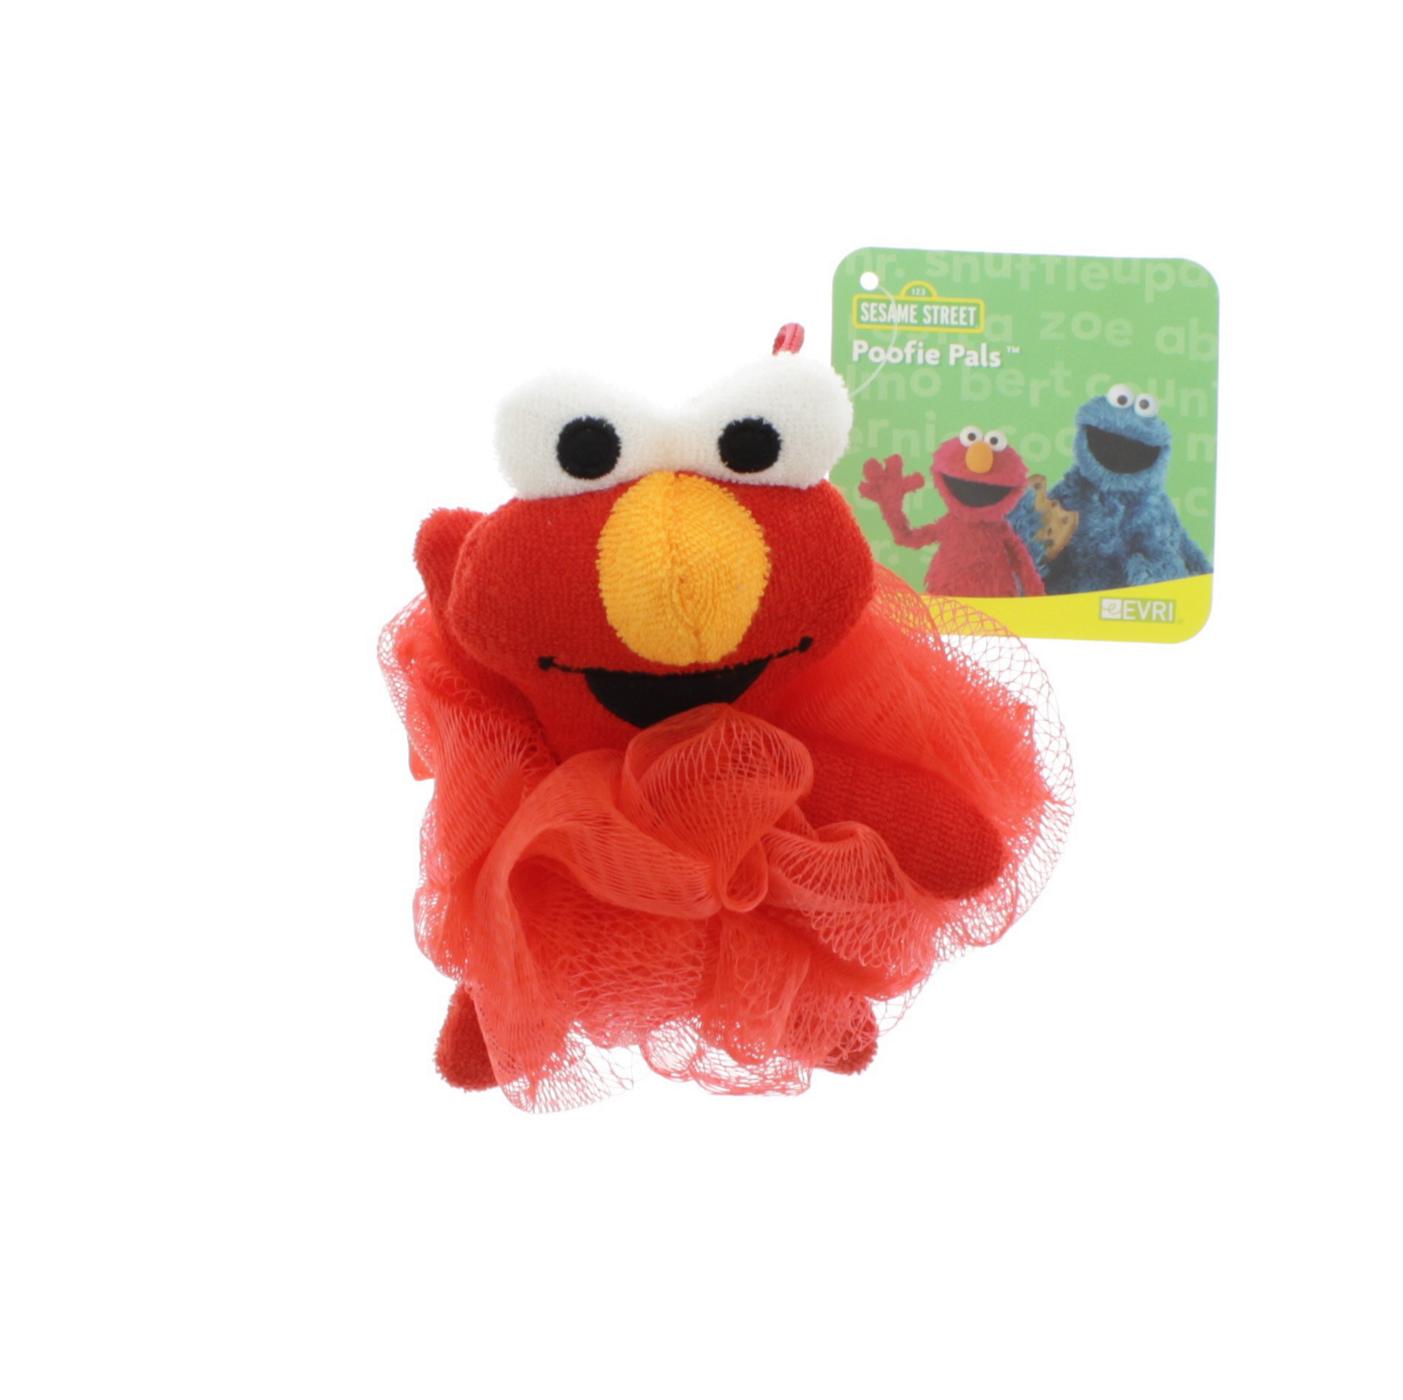 Evriholder Sesame Street Poofie Pals, assorted characters; image 1 of 2